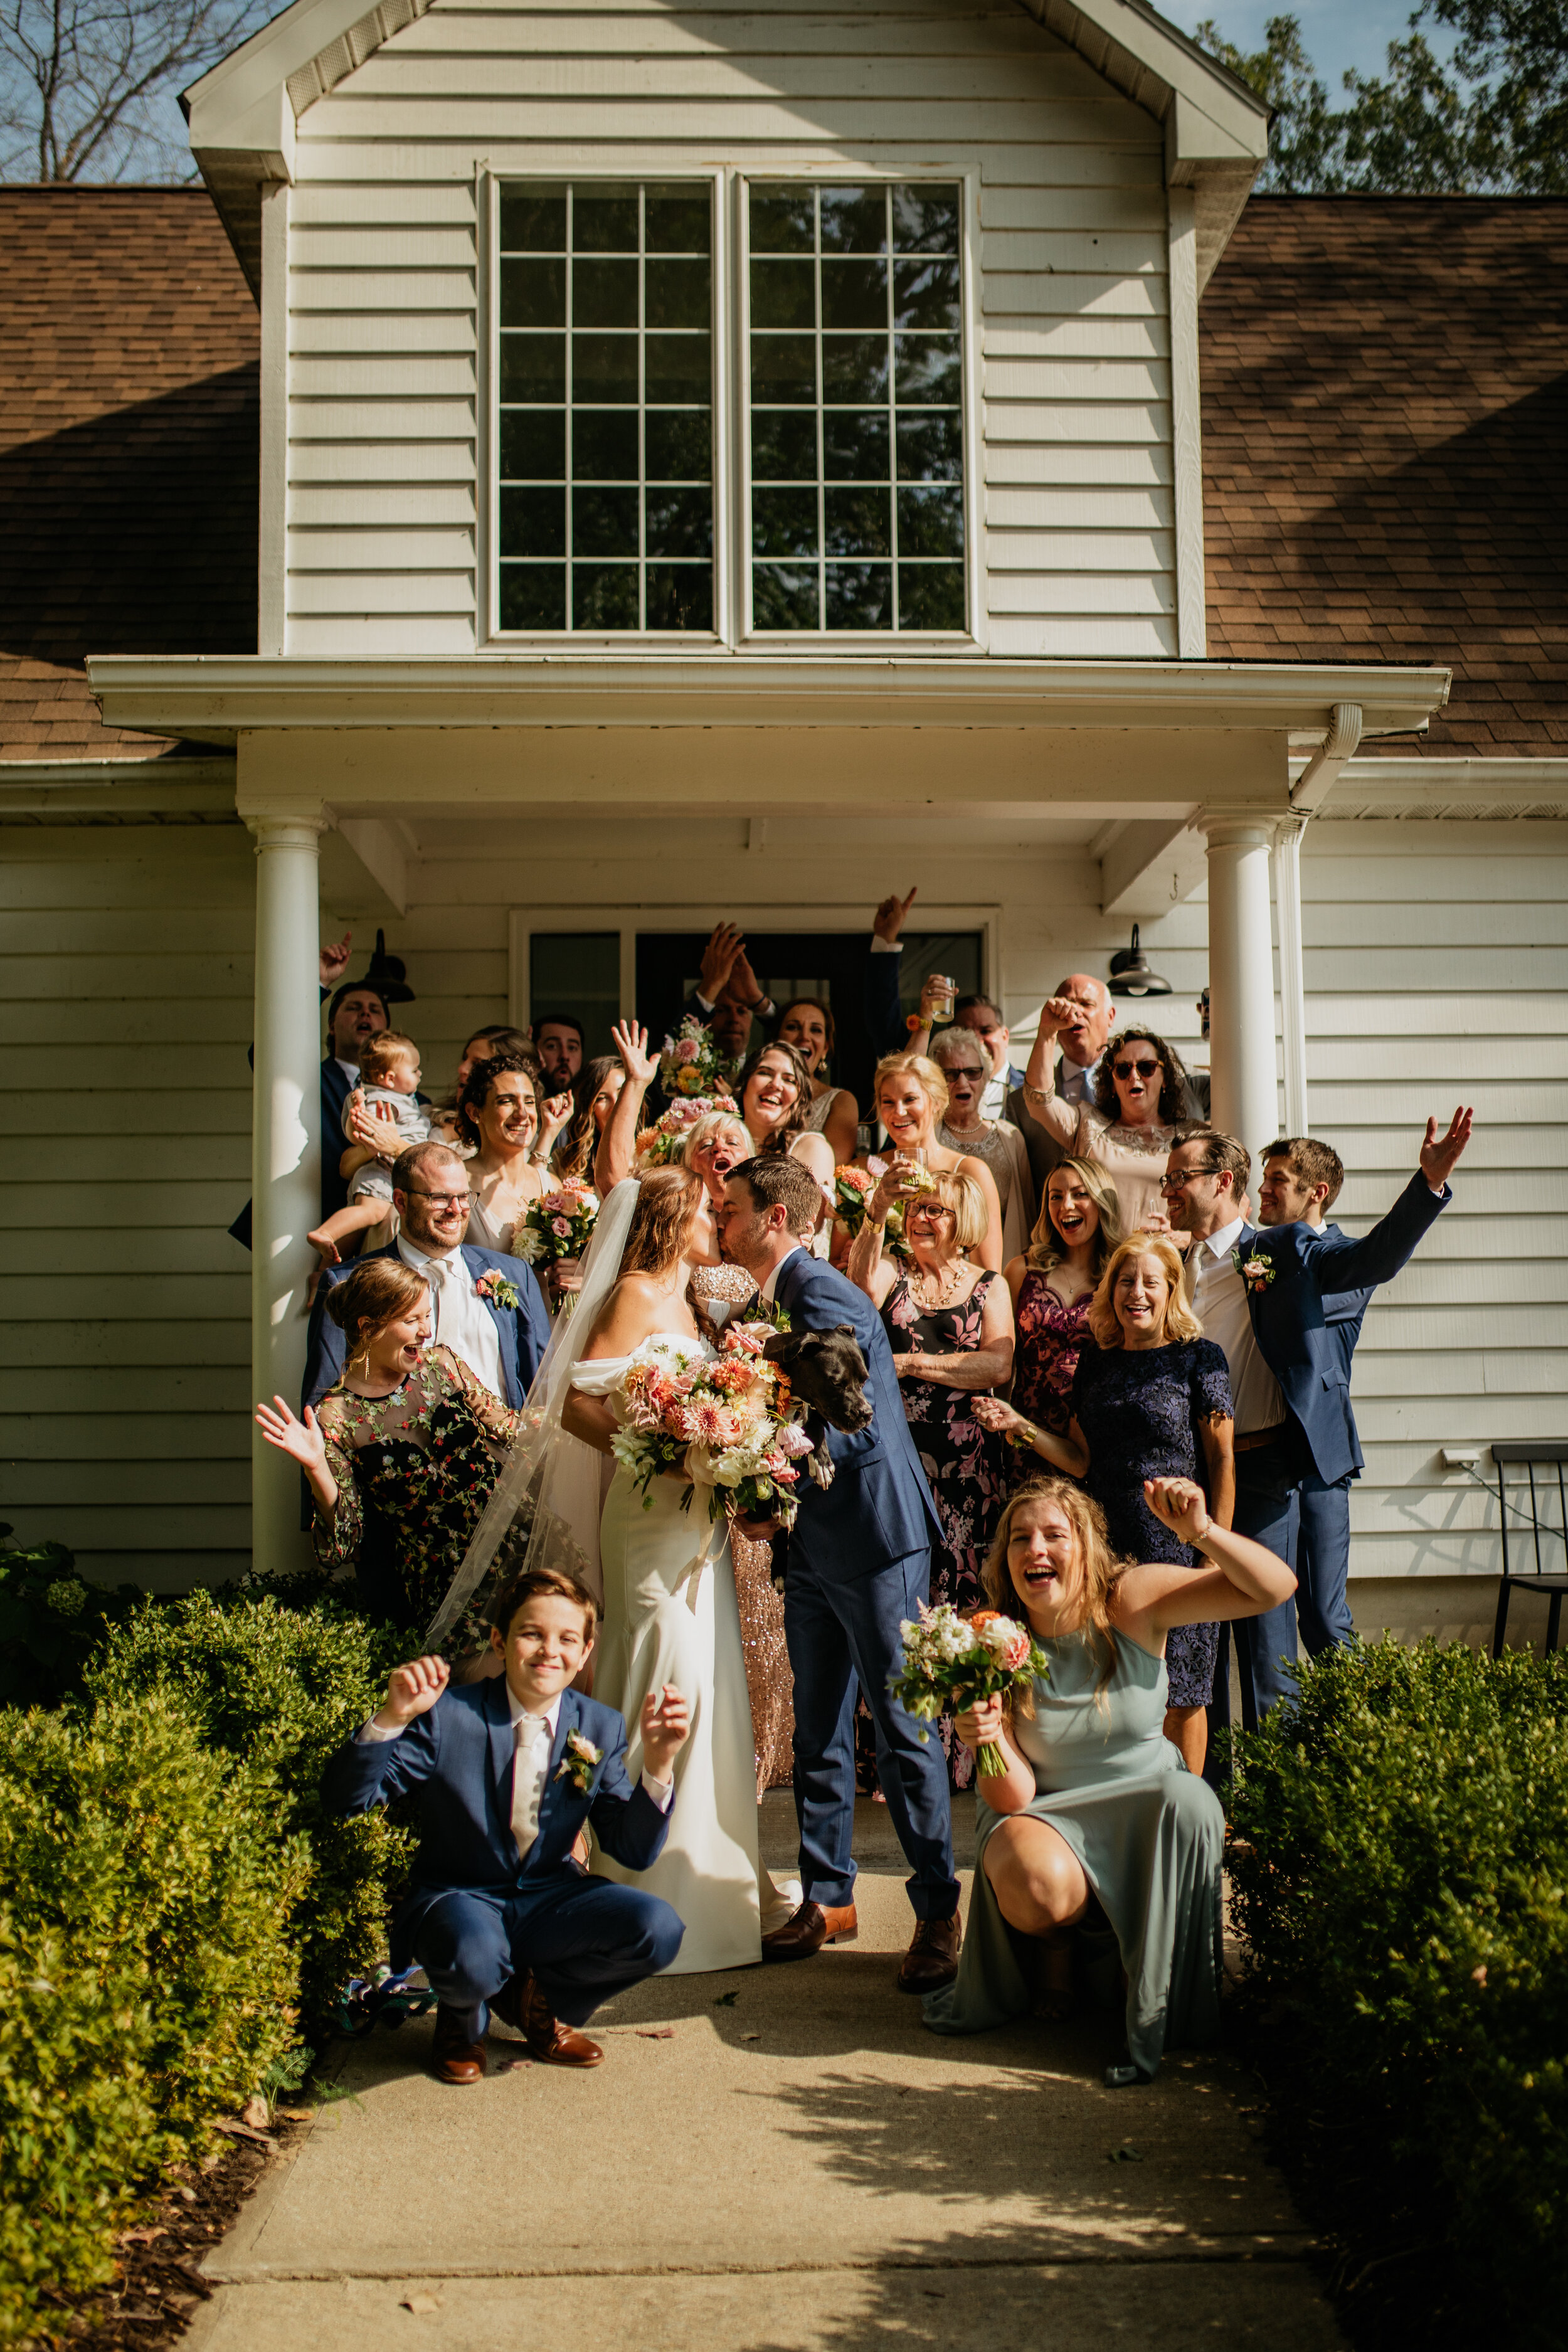 How To Have A Private Backyard Airbnb Wedding in Michigan